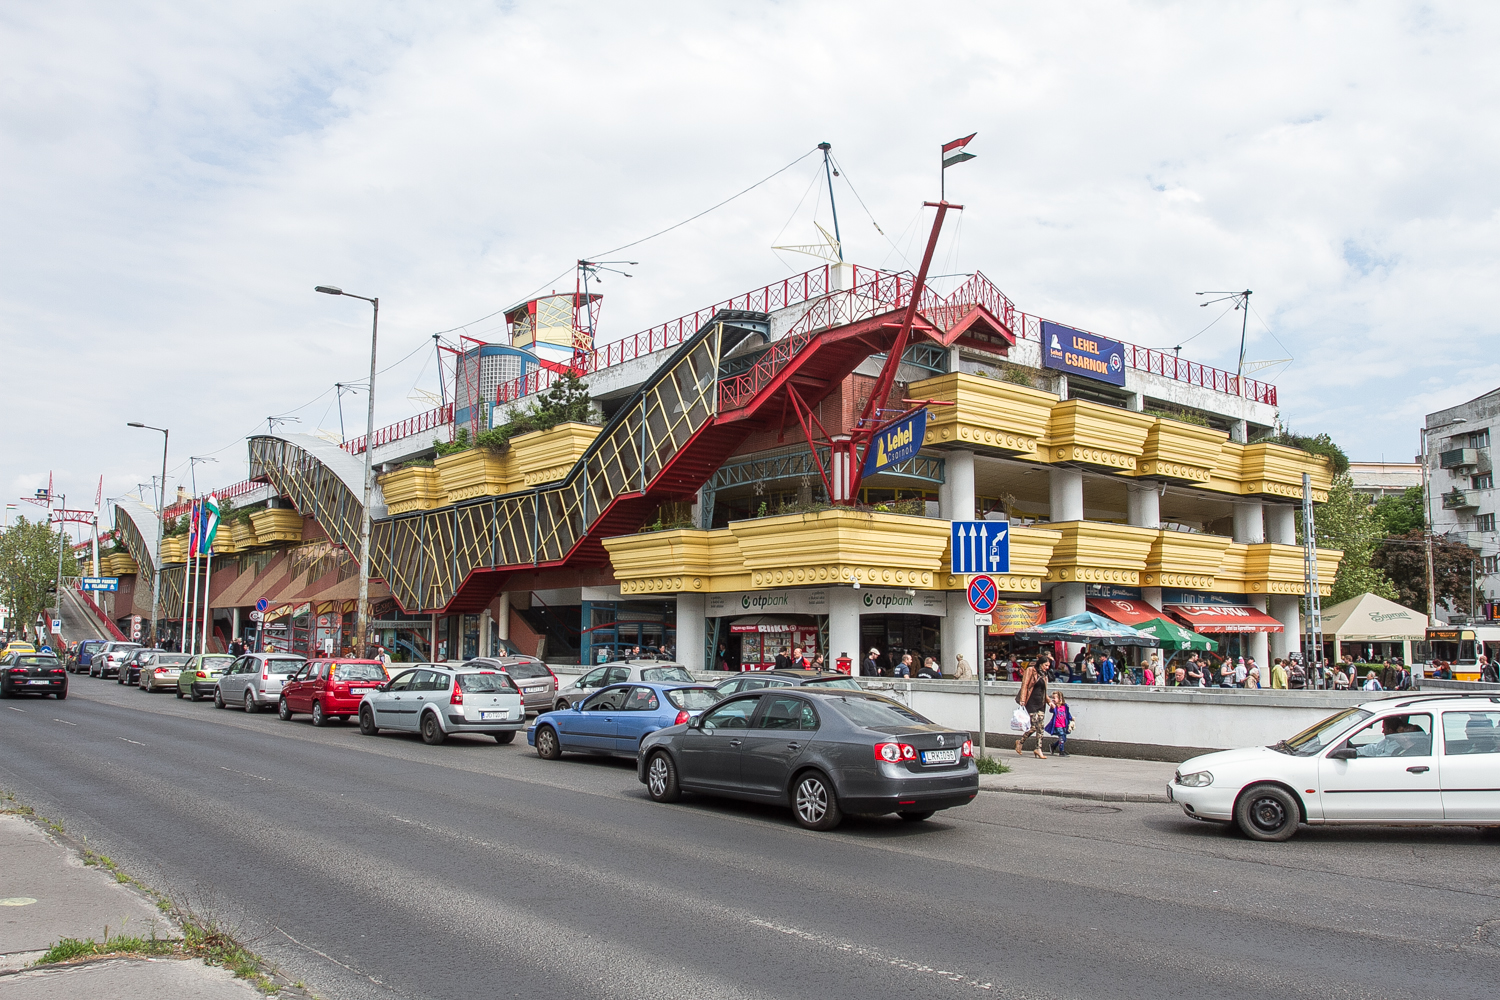 5 most unusual buildings in Budapest